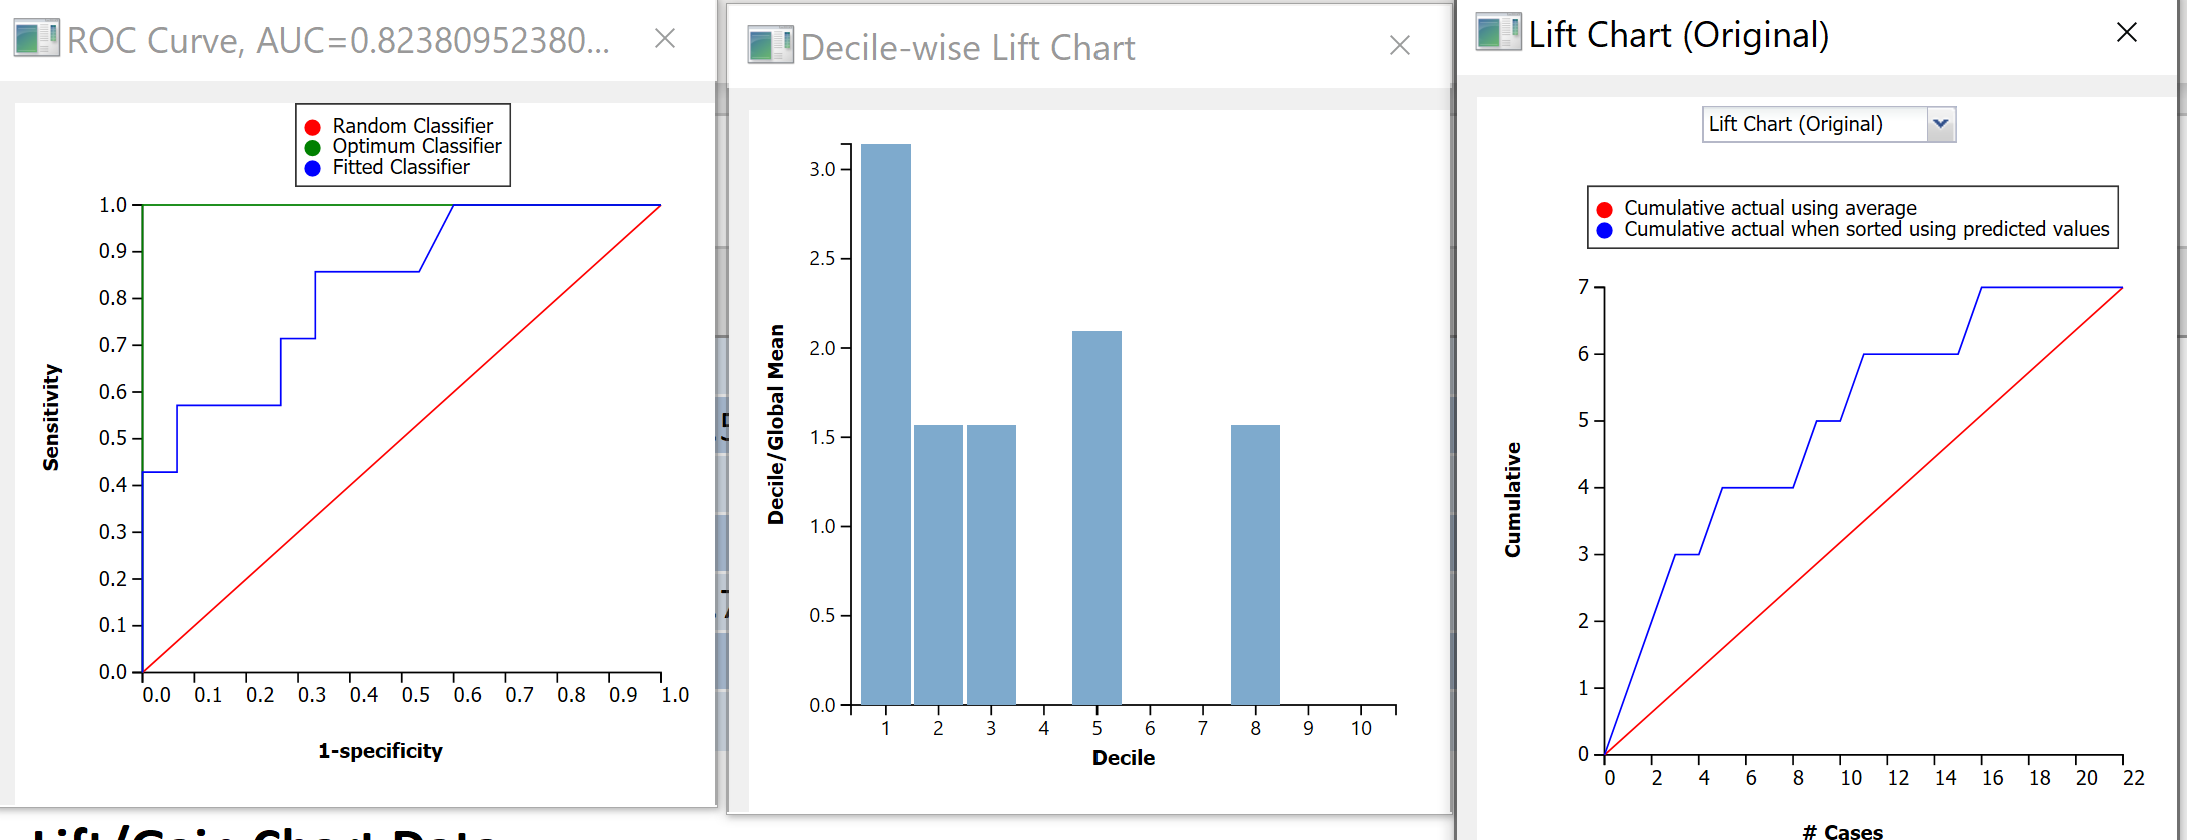 Decile Wise Lift Chart